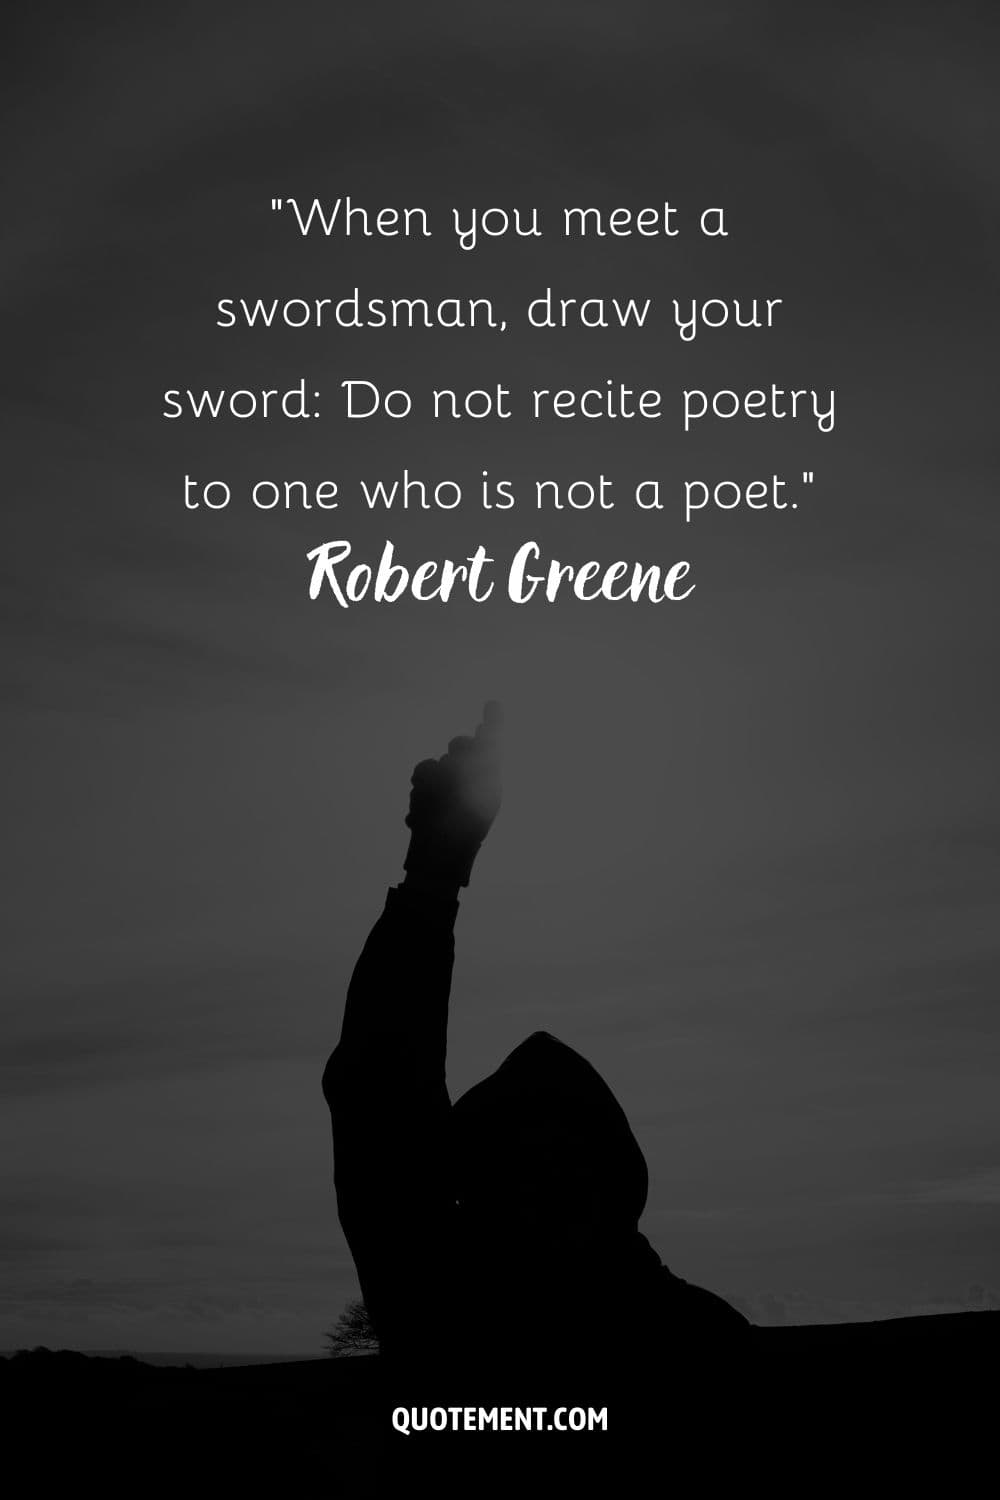 “When you meet a swordsman, draw your sword Do not recite poetry to one who is not a poet.” ― Robert Greene, The 48 Laws of Power